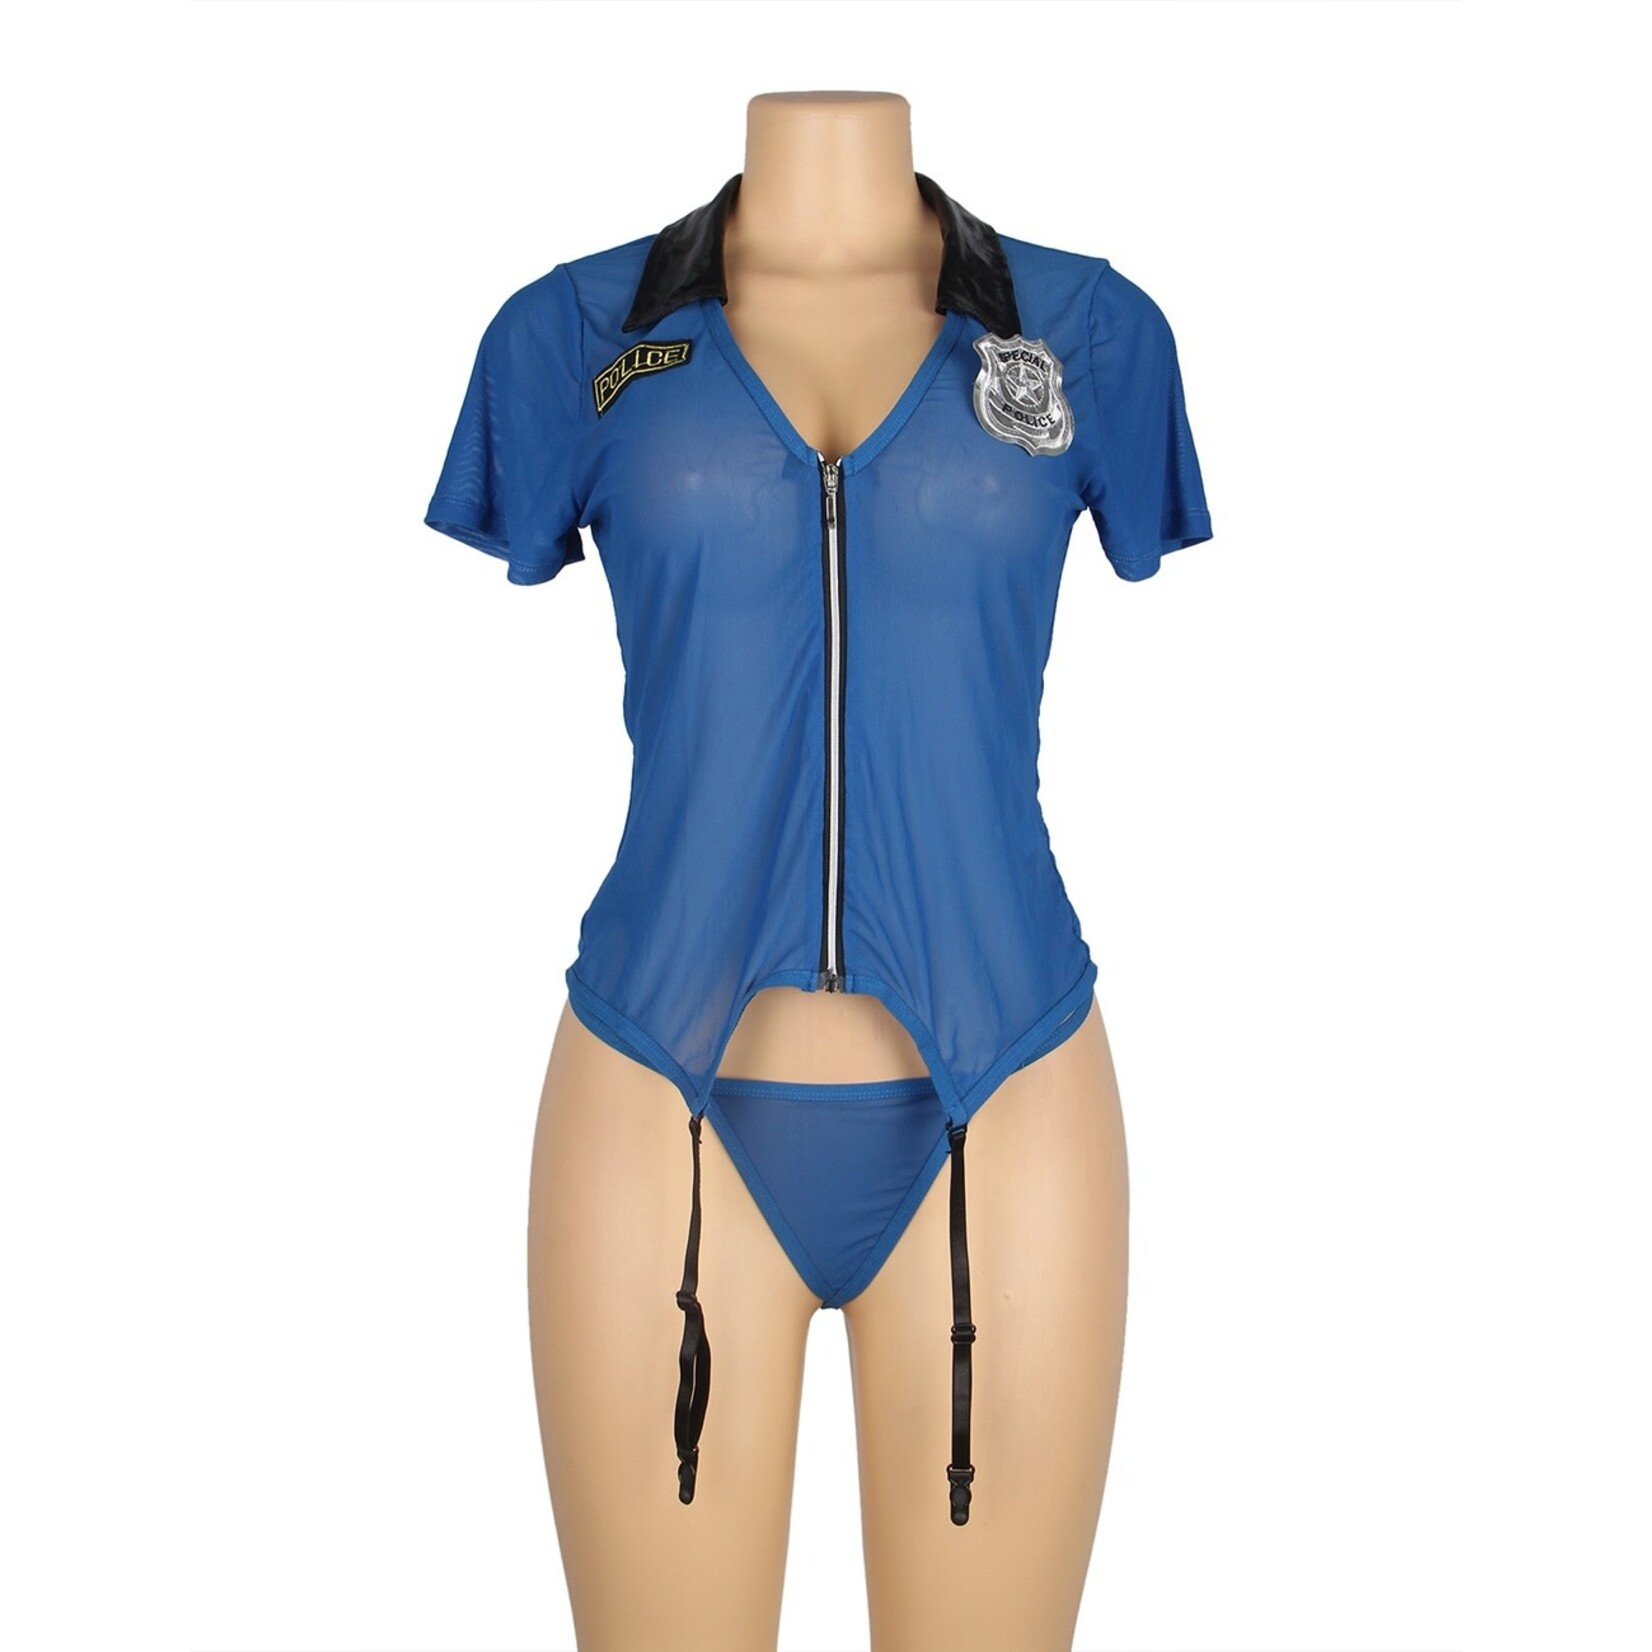 OH YEAH! -  BLUE ZIPPER FRONT SEXY GARTER BELT POLICE COSTUME WITH HANDCUFFS XS-S